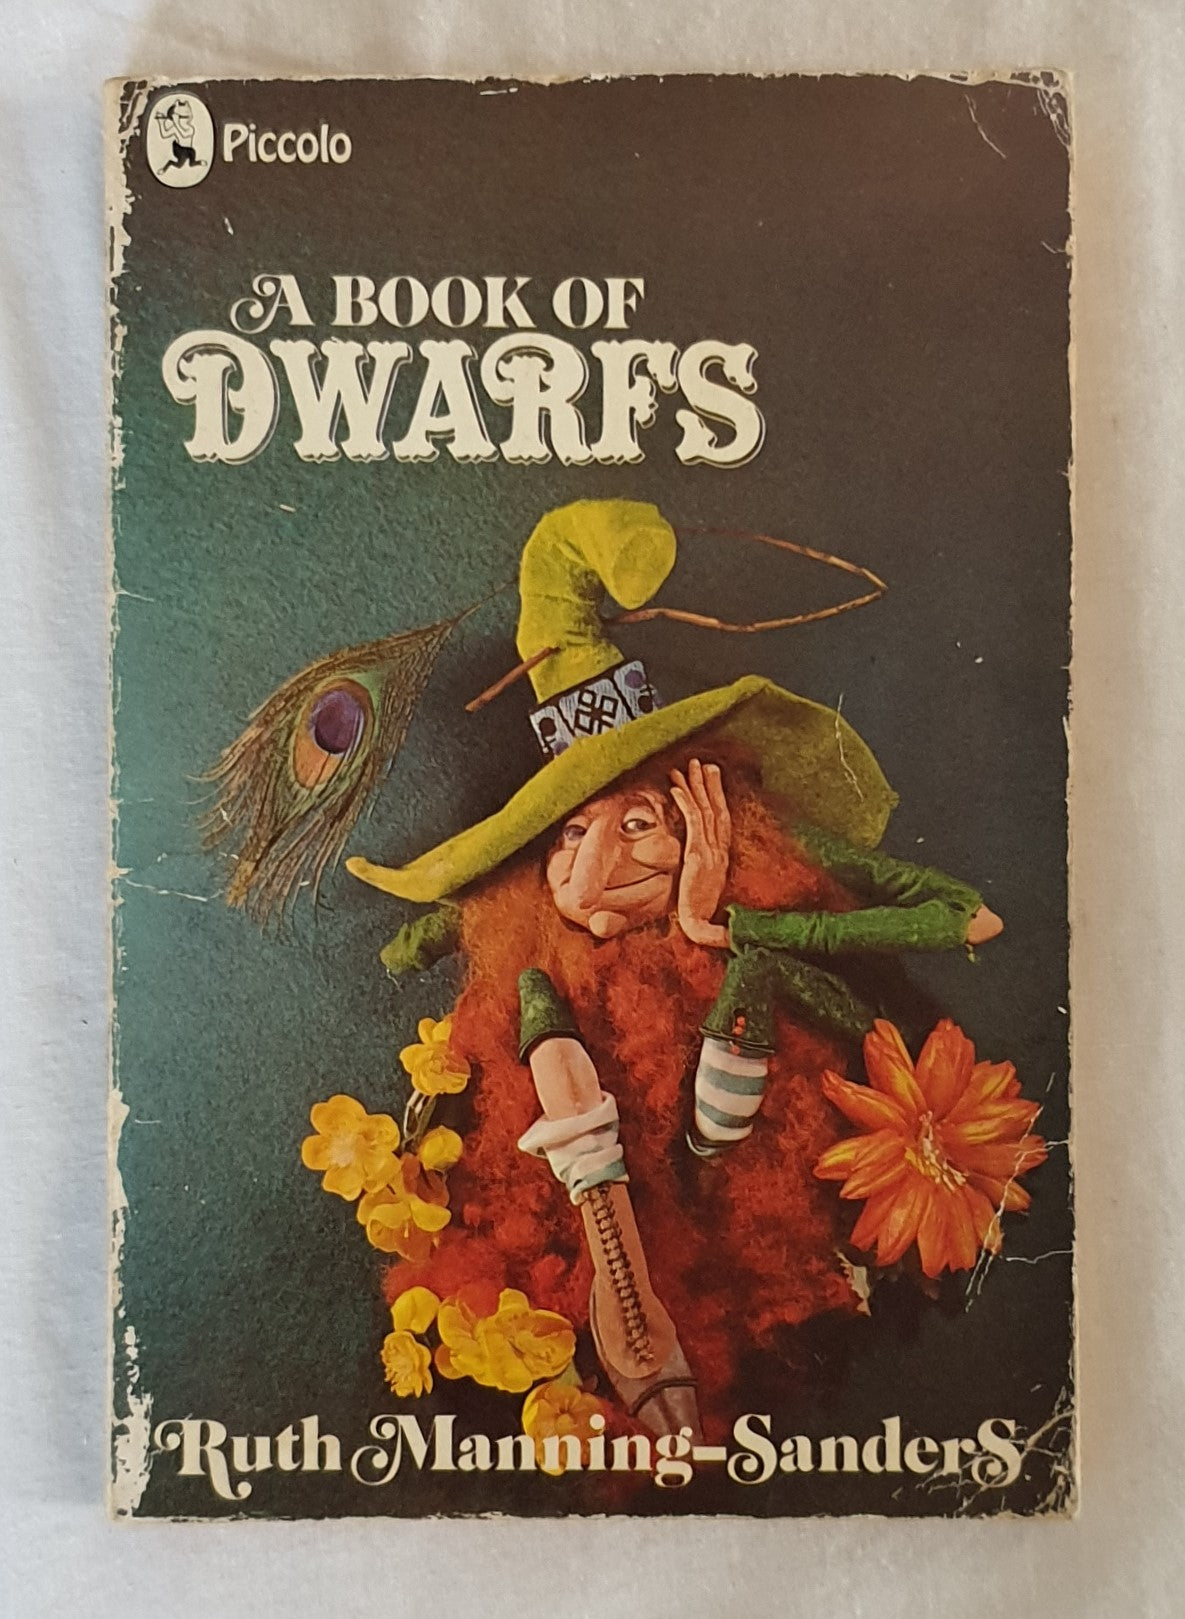 A Book of Dwarfs by Ruth Manning-Sanders